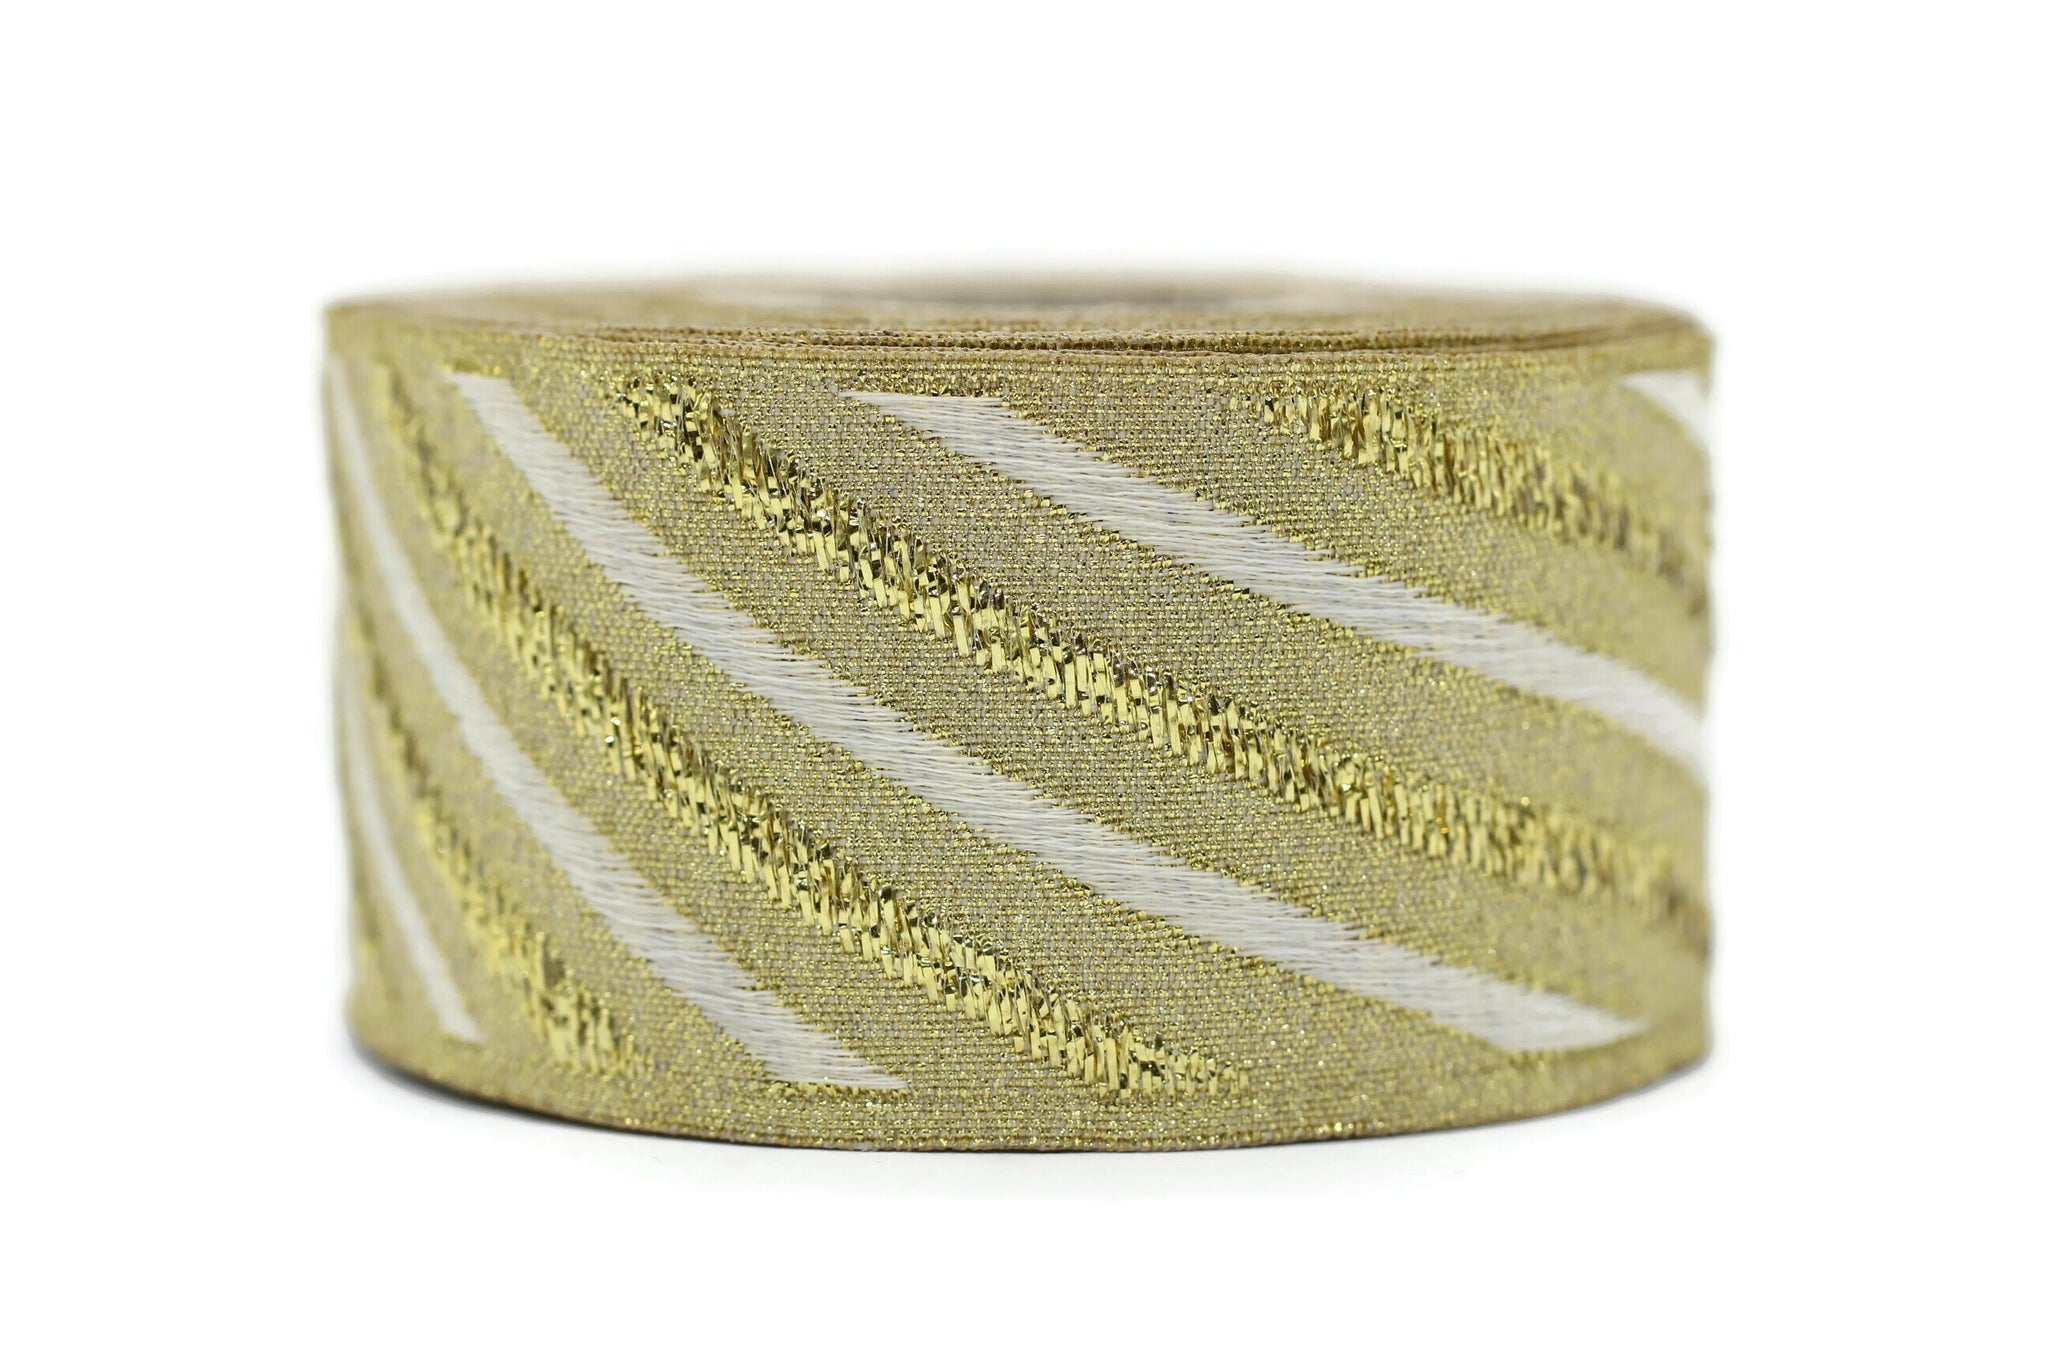 35 mm Gold/White Jacquard ribbons 1.37 inches, Wavy Jacquard trim, Sewing trim, Jacquard ribbons, woven ribbons, dog collars, 35340